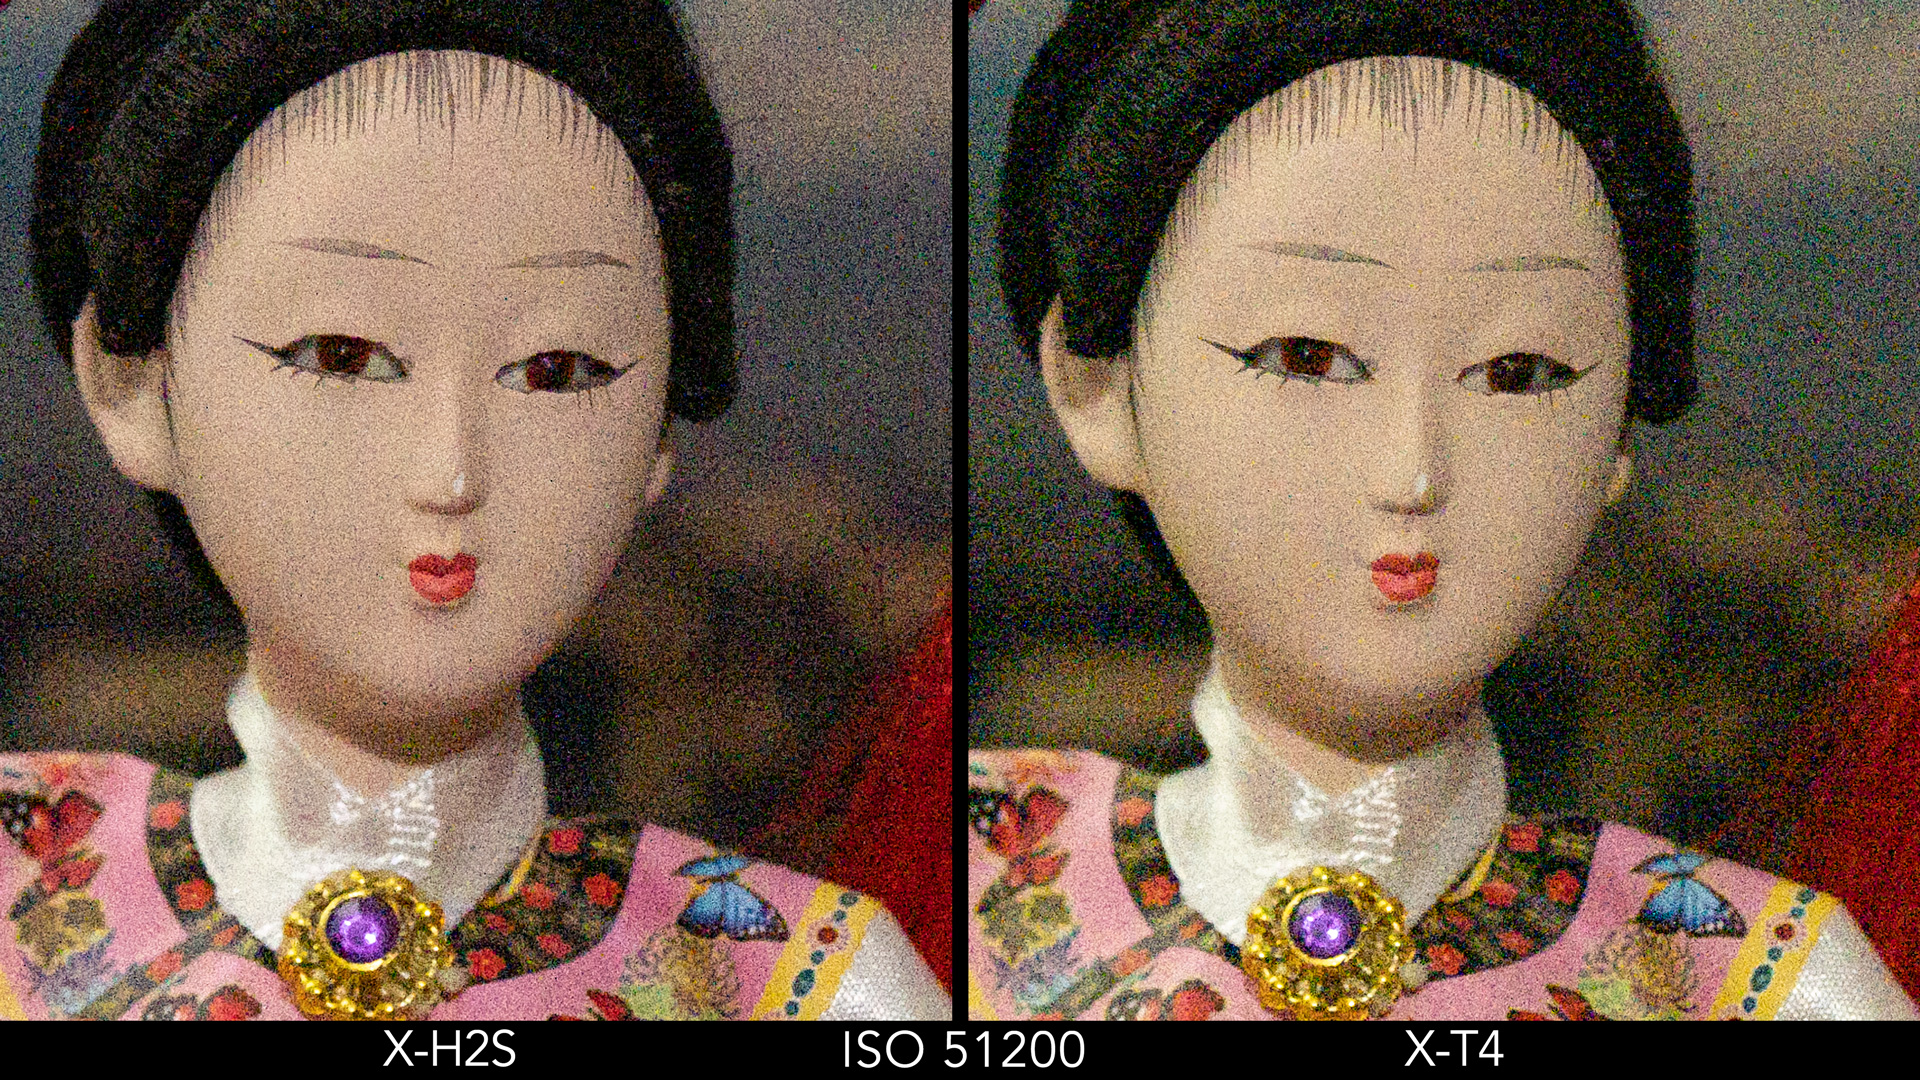 Side by side crop of the Japanese doll, showing the quality at ISO 51200 for the X-H2S and X-T4